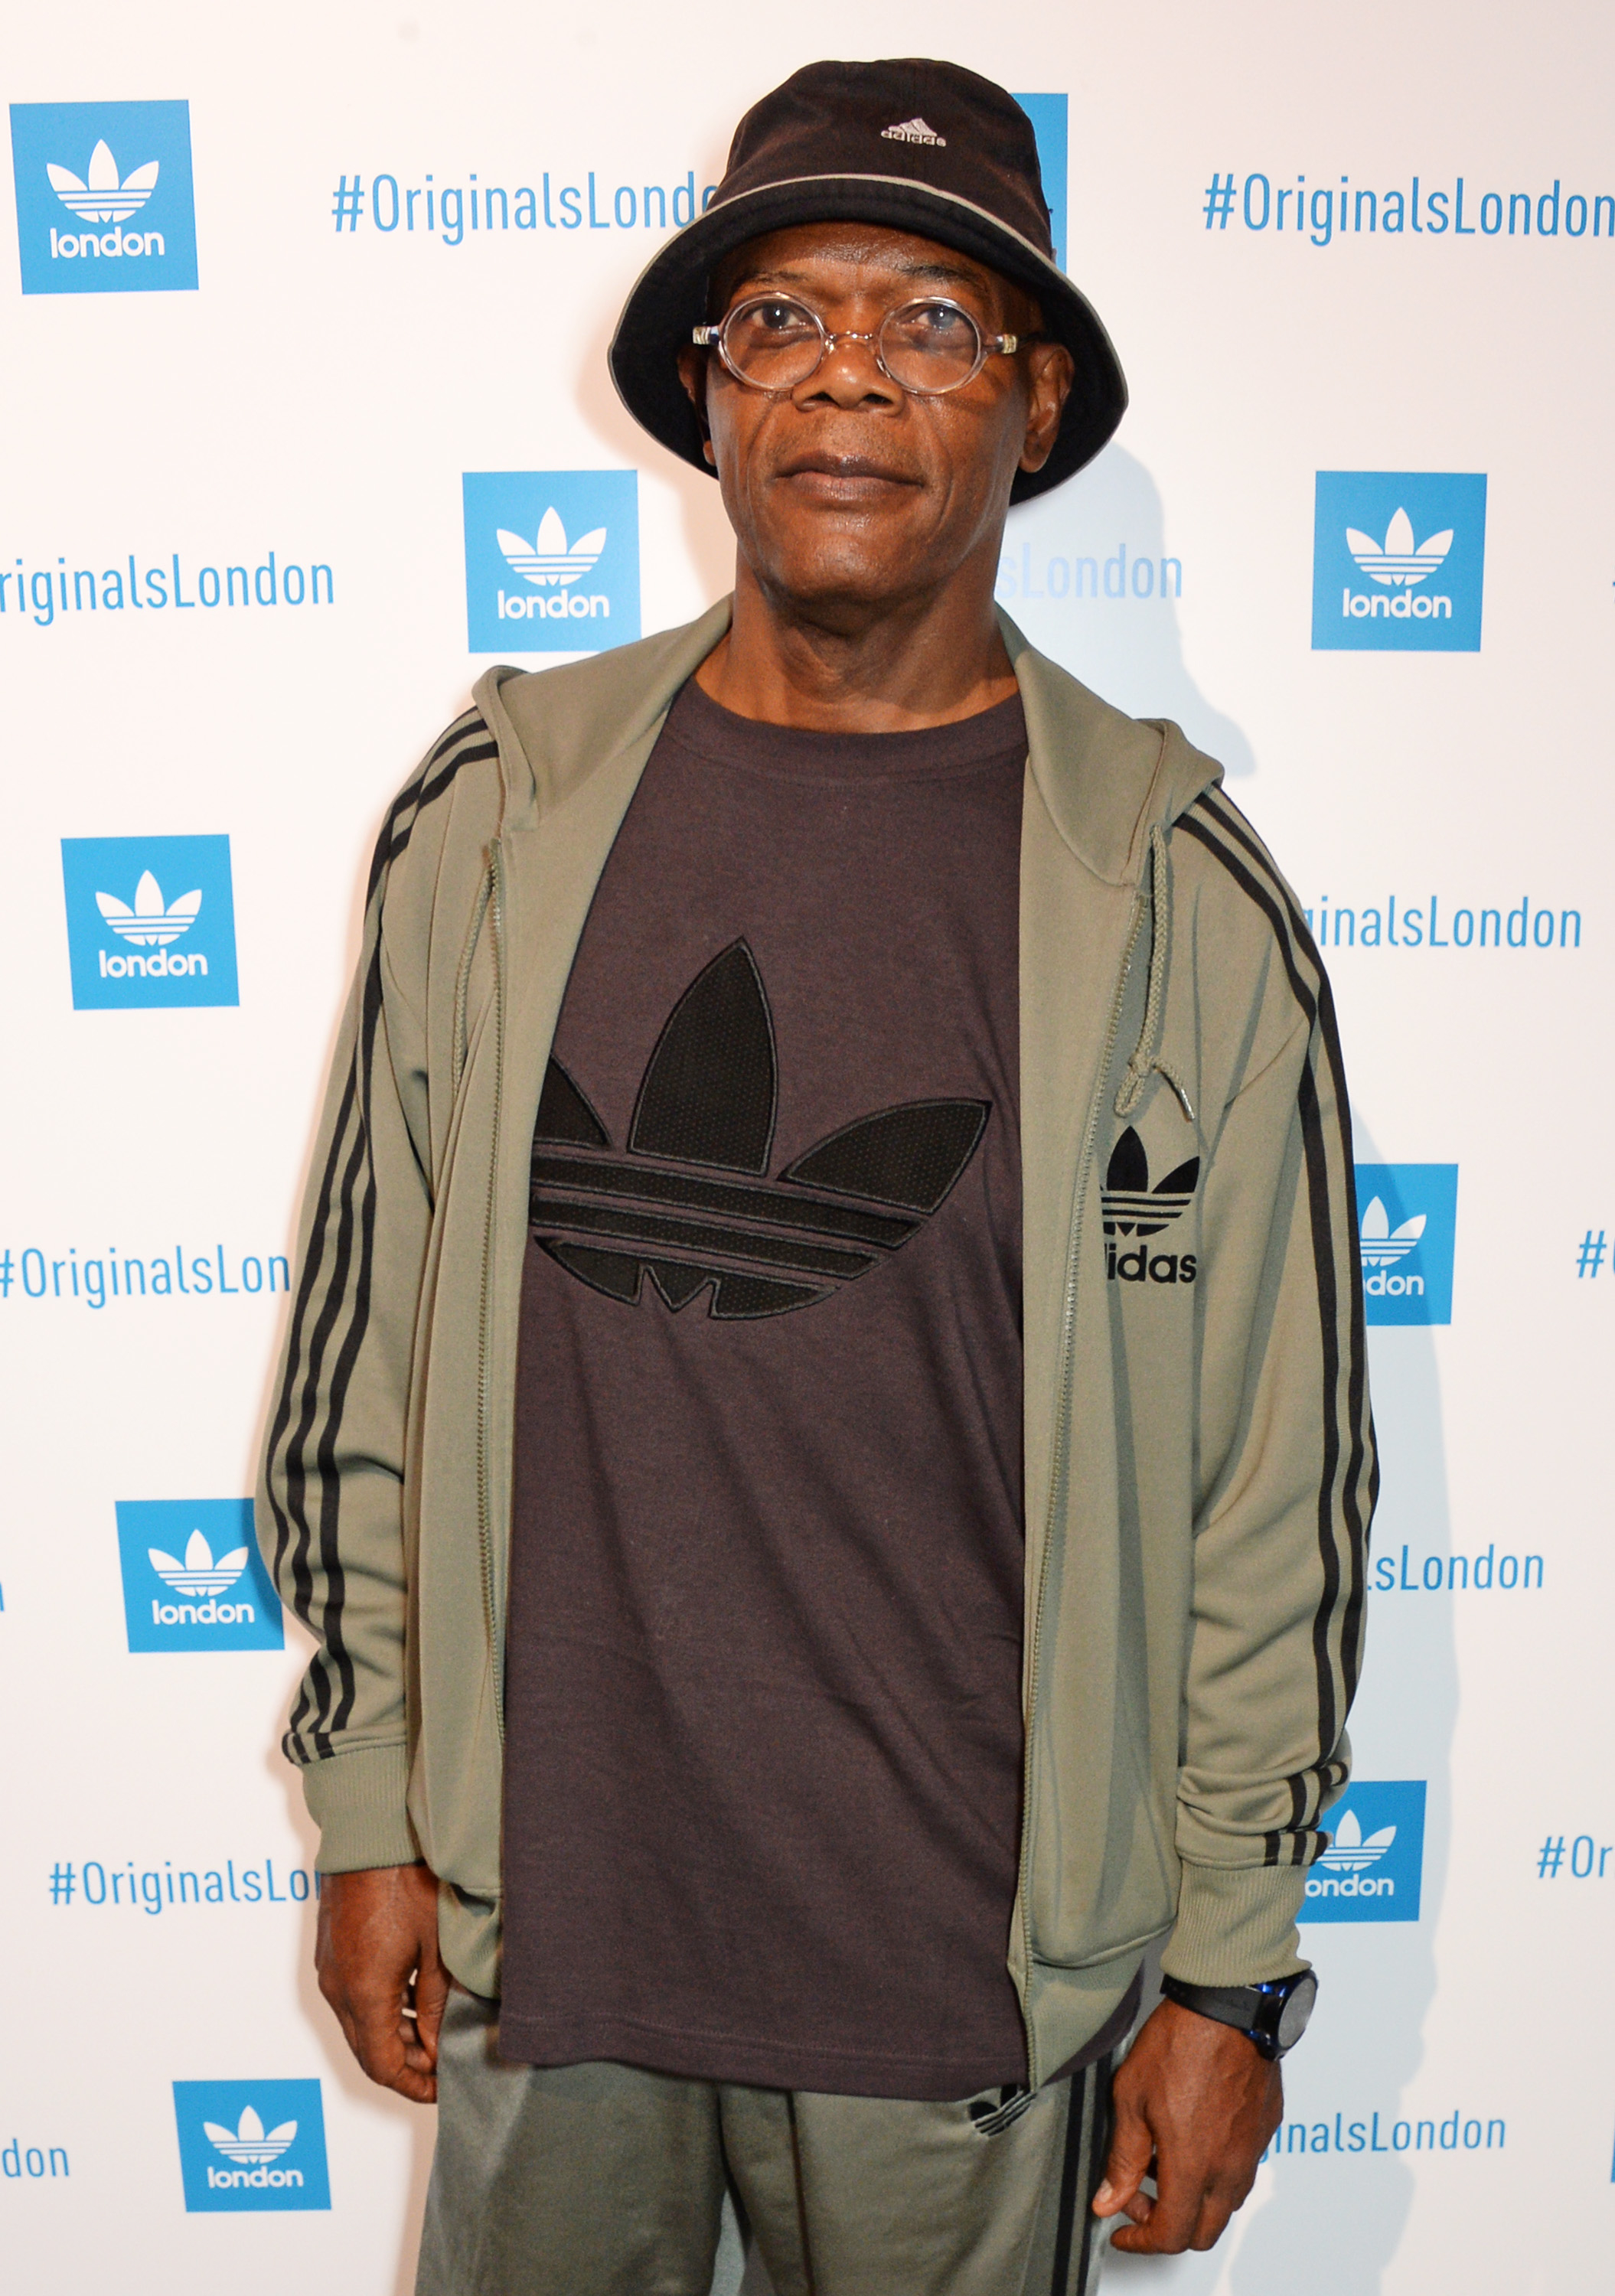 he&#x27;s wearing glasses and an adidas outfit for an event